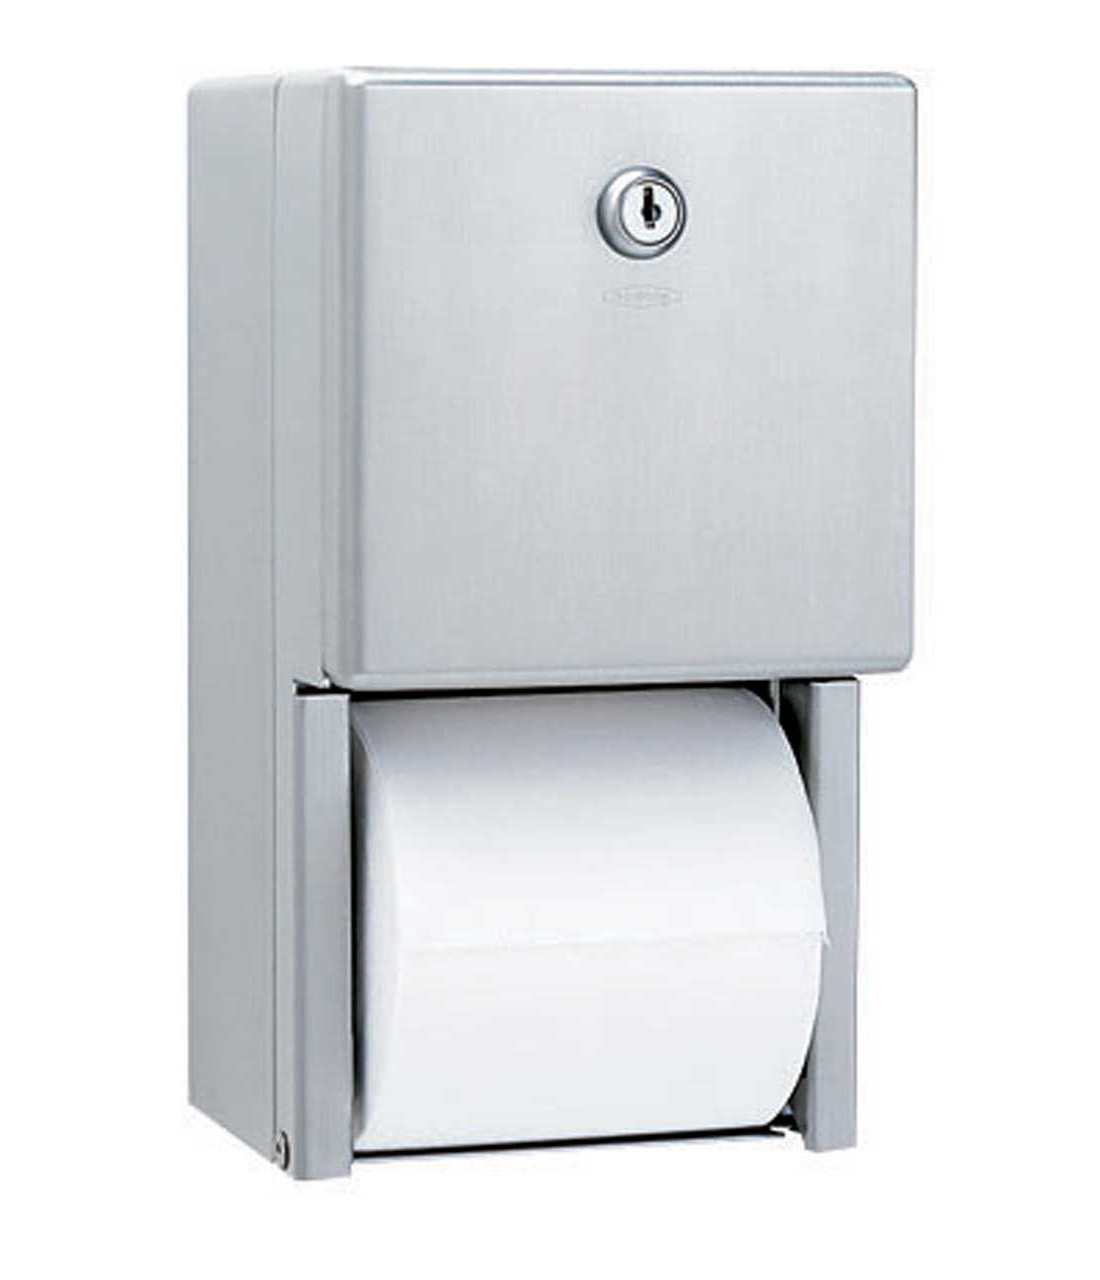 Bobrick B667 - Recessed Toilet Paper Holder - household items - by